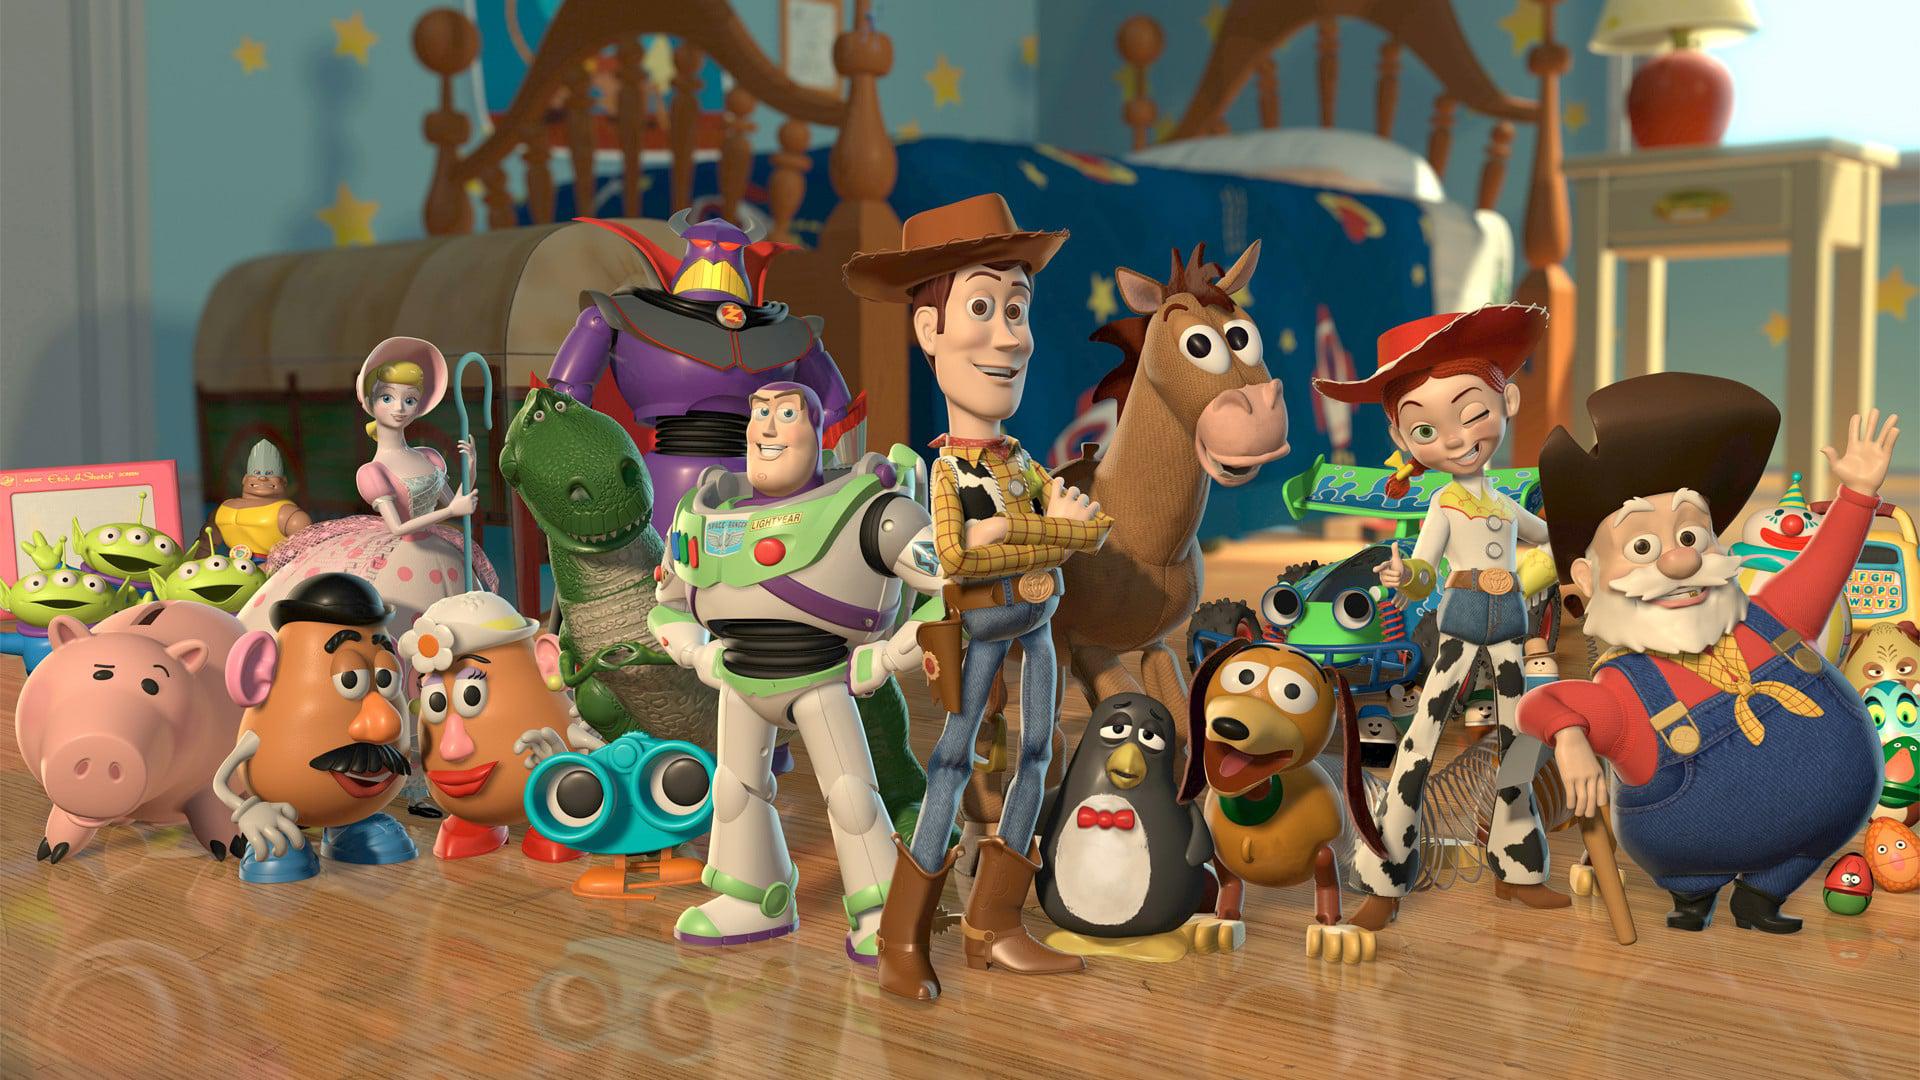 Backdrop Image for Toy Story 2